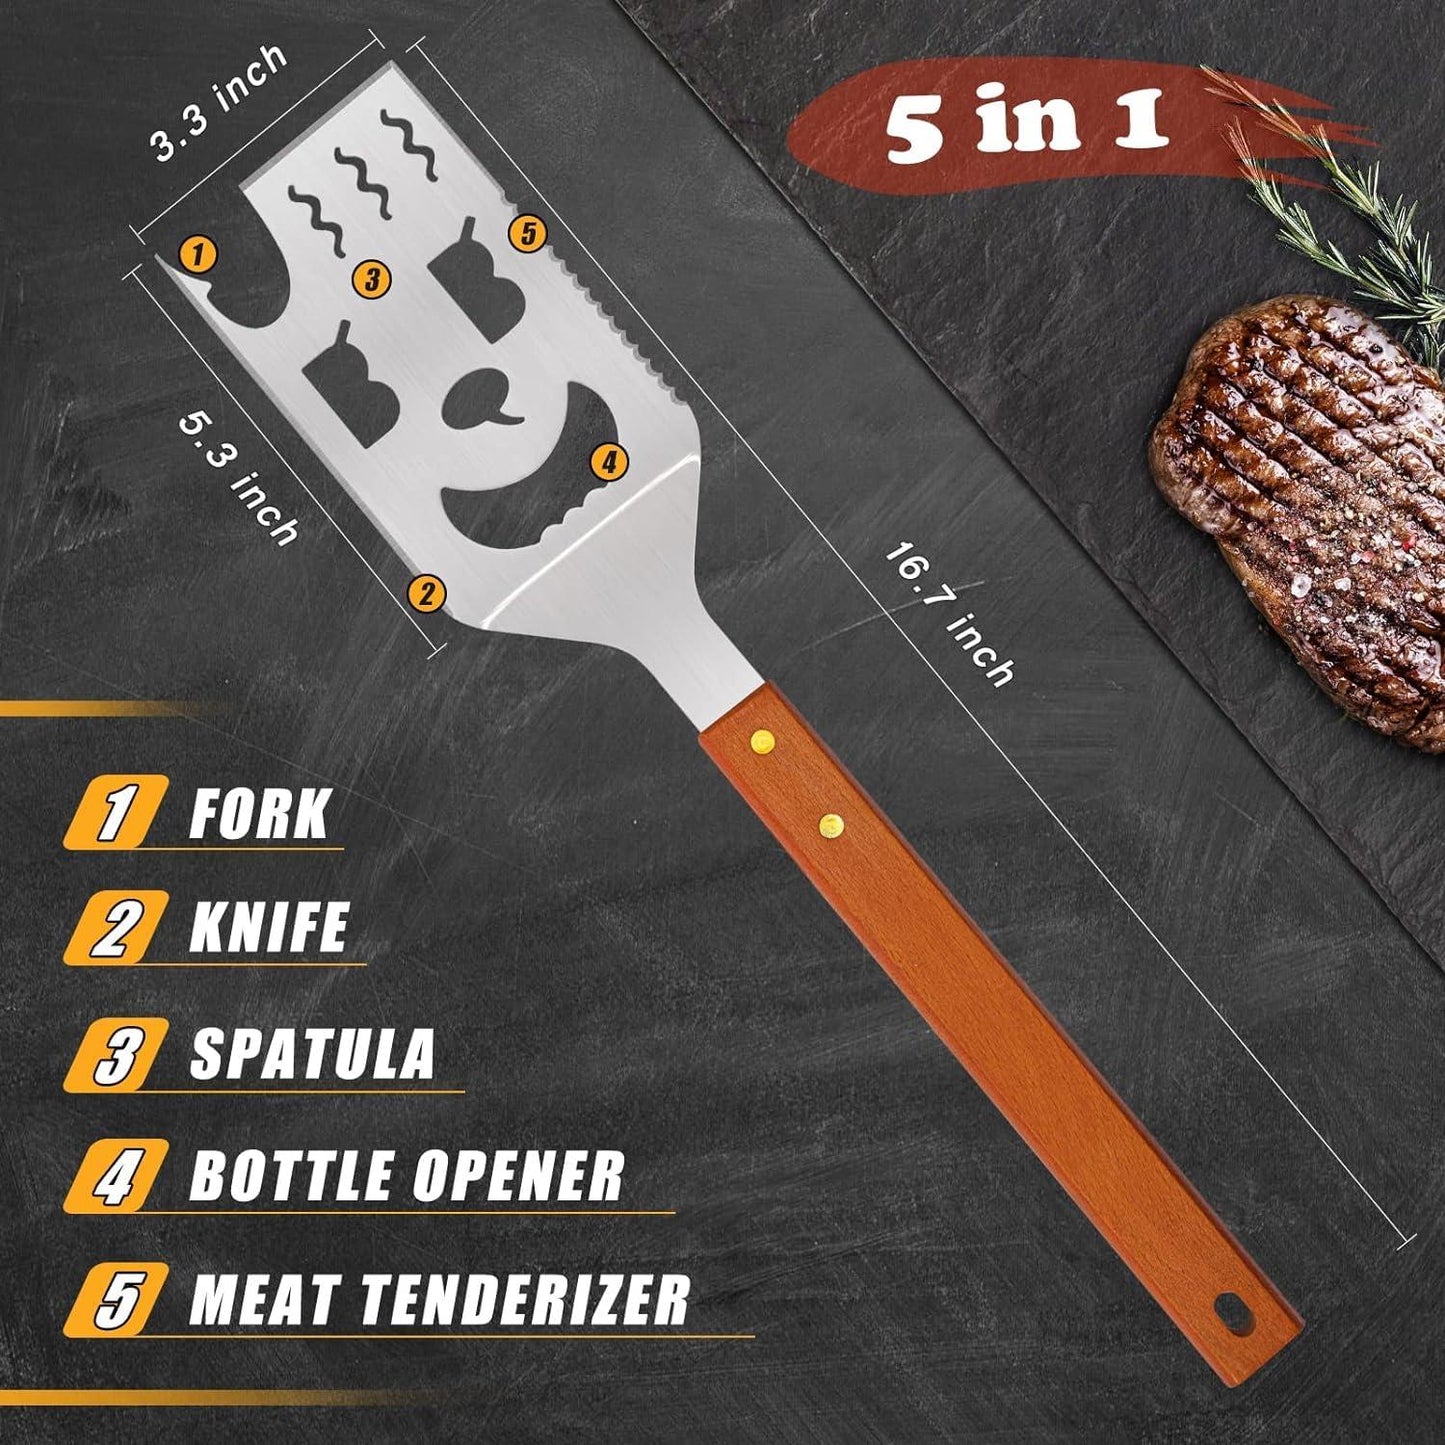 5 in 1 Grill Spatula Stainless Steel for Outdoor Grill,Personalized Spatula Grill with Flip Fork, Knife, Serrated Edge,17 Inch Multiuse Cool Long Grill Spatula for Barbecue - CookCave